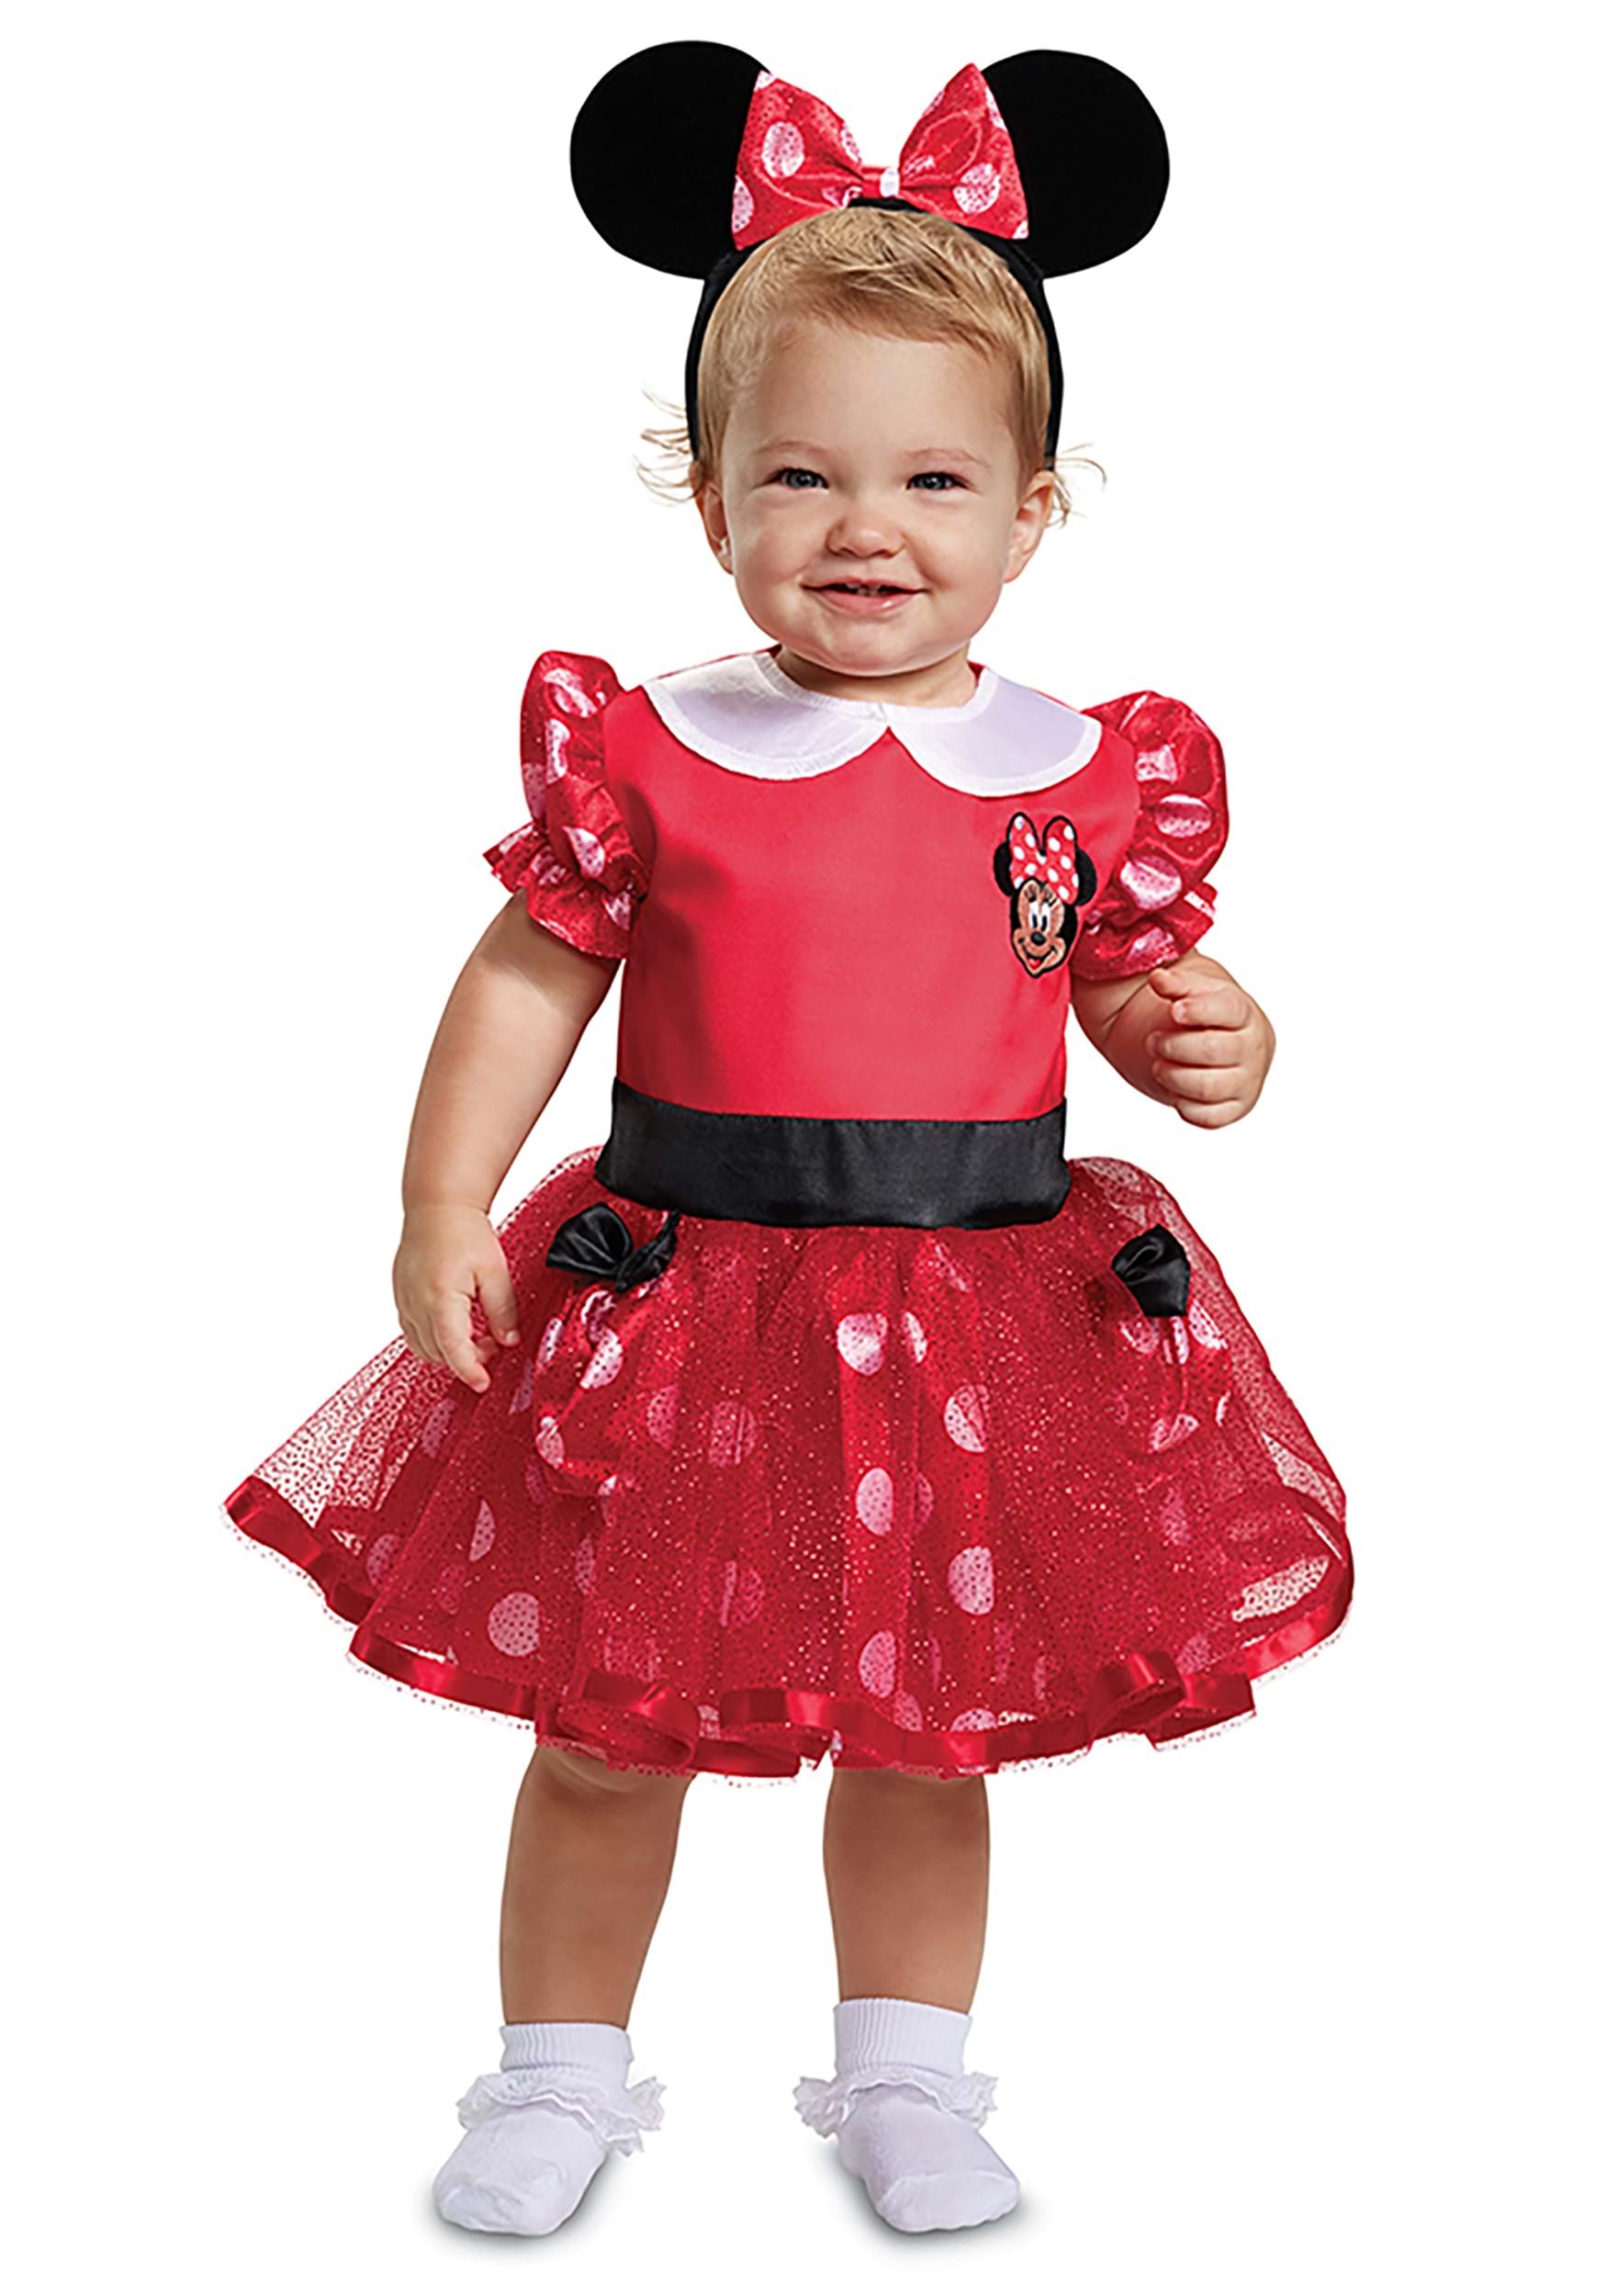 Infant/Toddler Minnie Mouse Costume